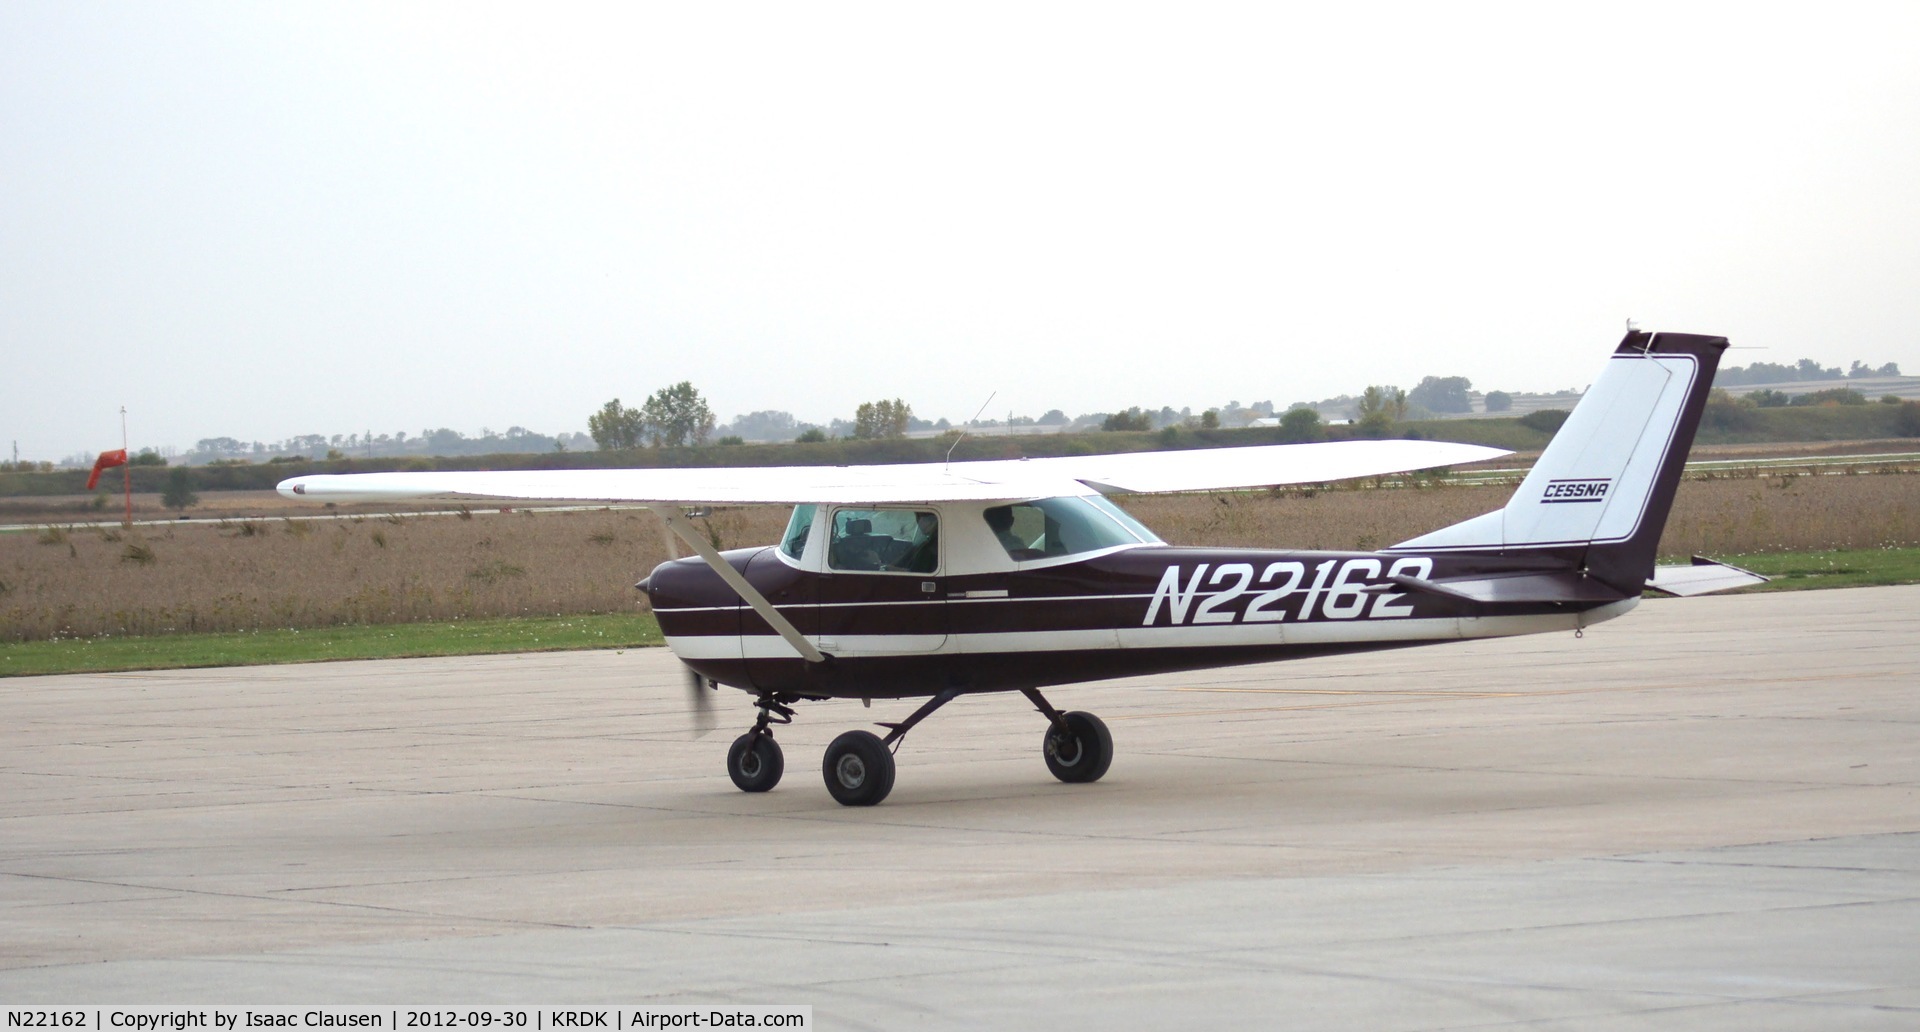 N22162, 1967 Cessna 150H C/N 15068108, Student Pilot on First Solo